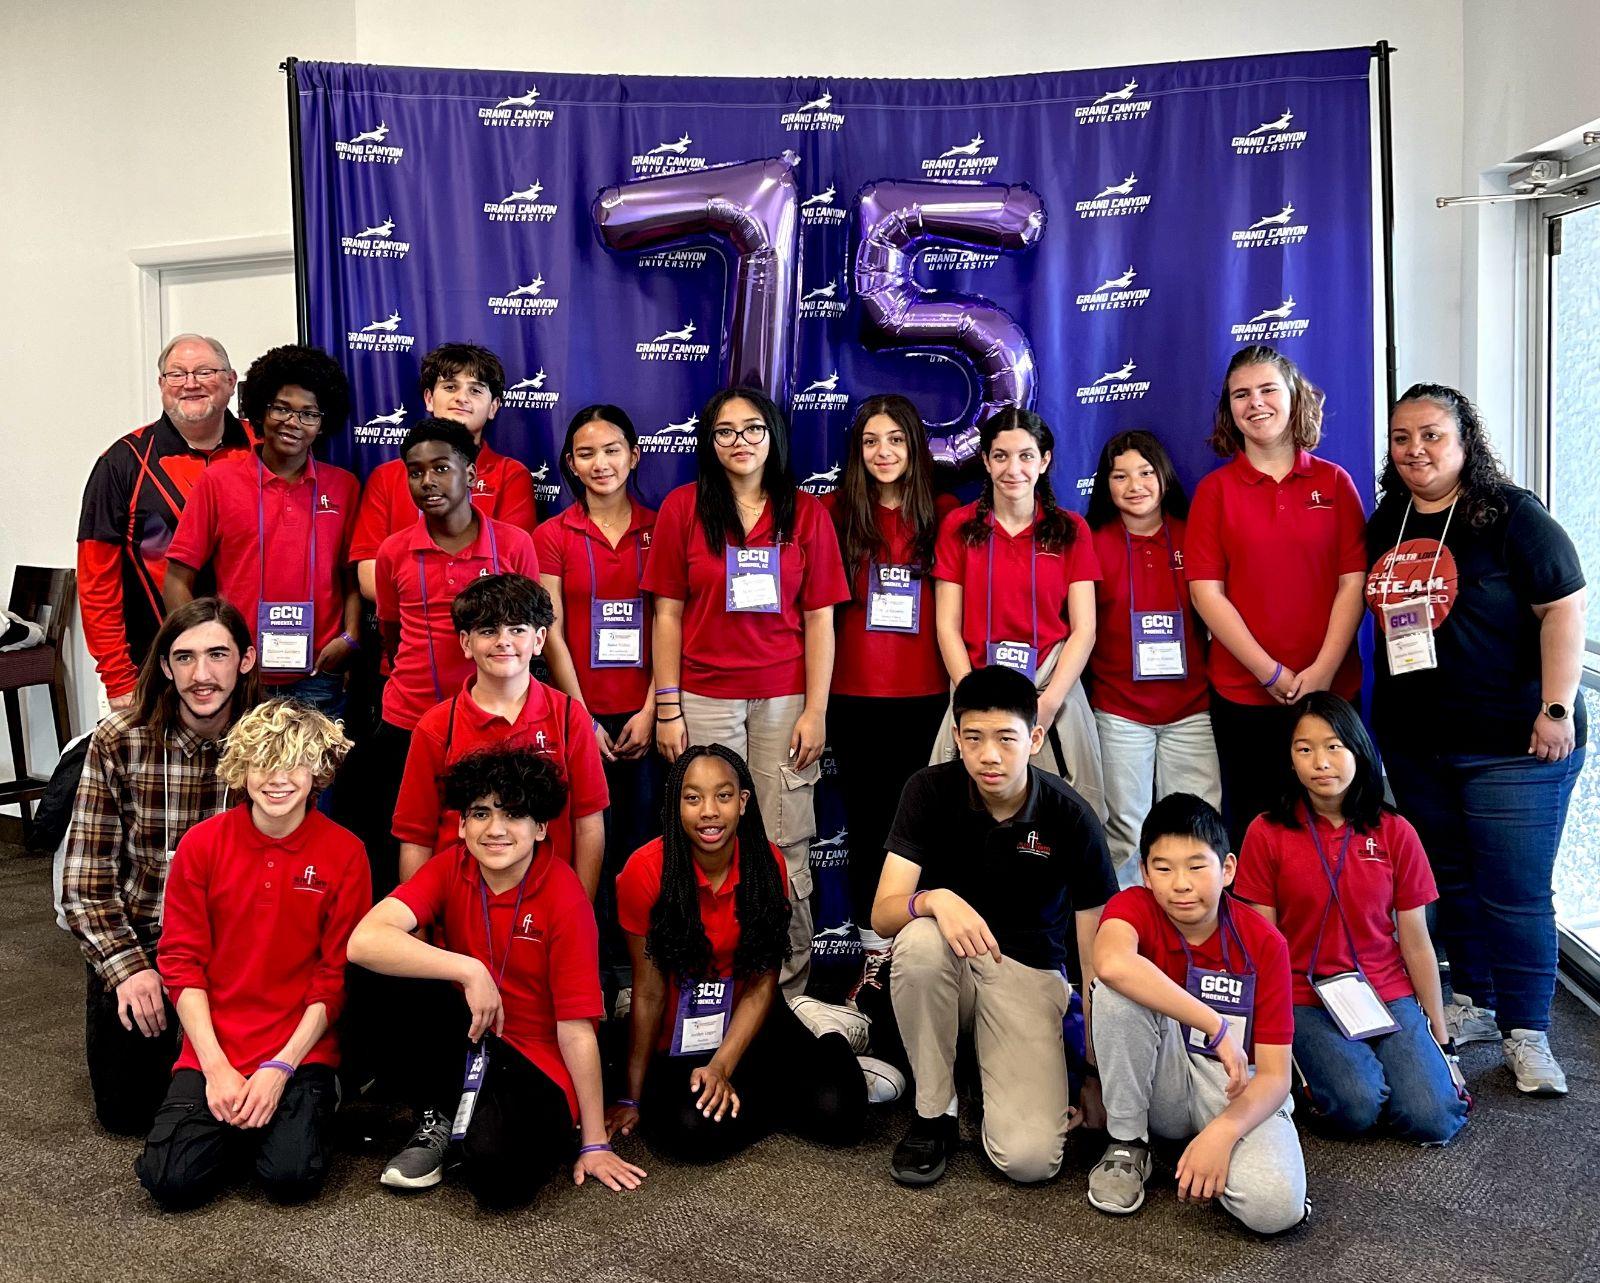 Alta Loma Christian School students compete at the GCU-ACSI International STEM Competition